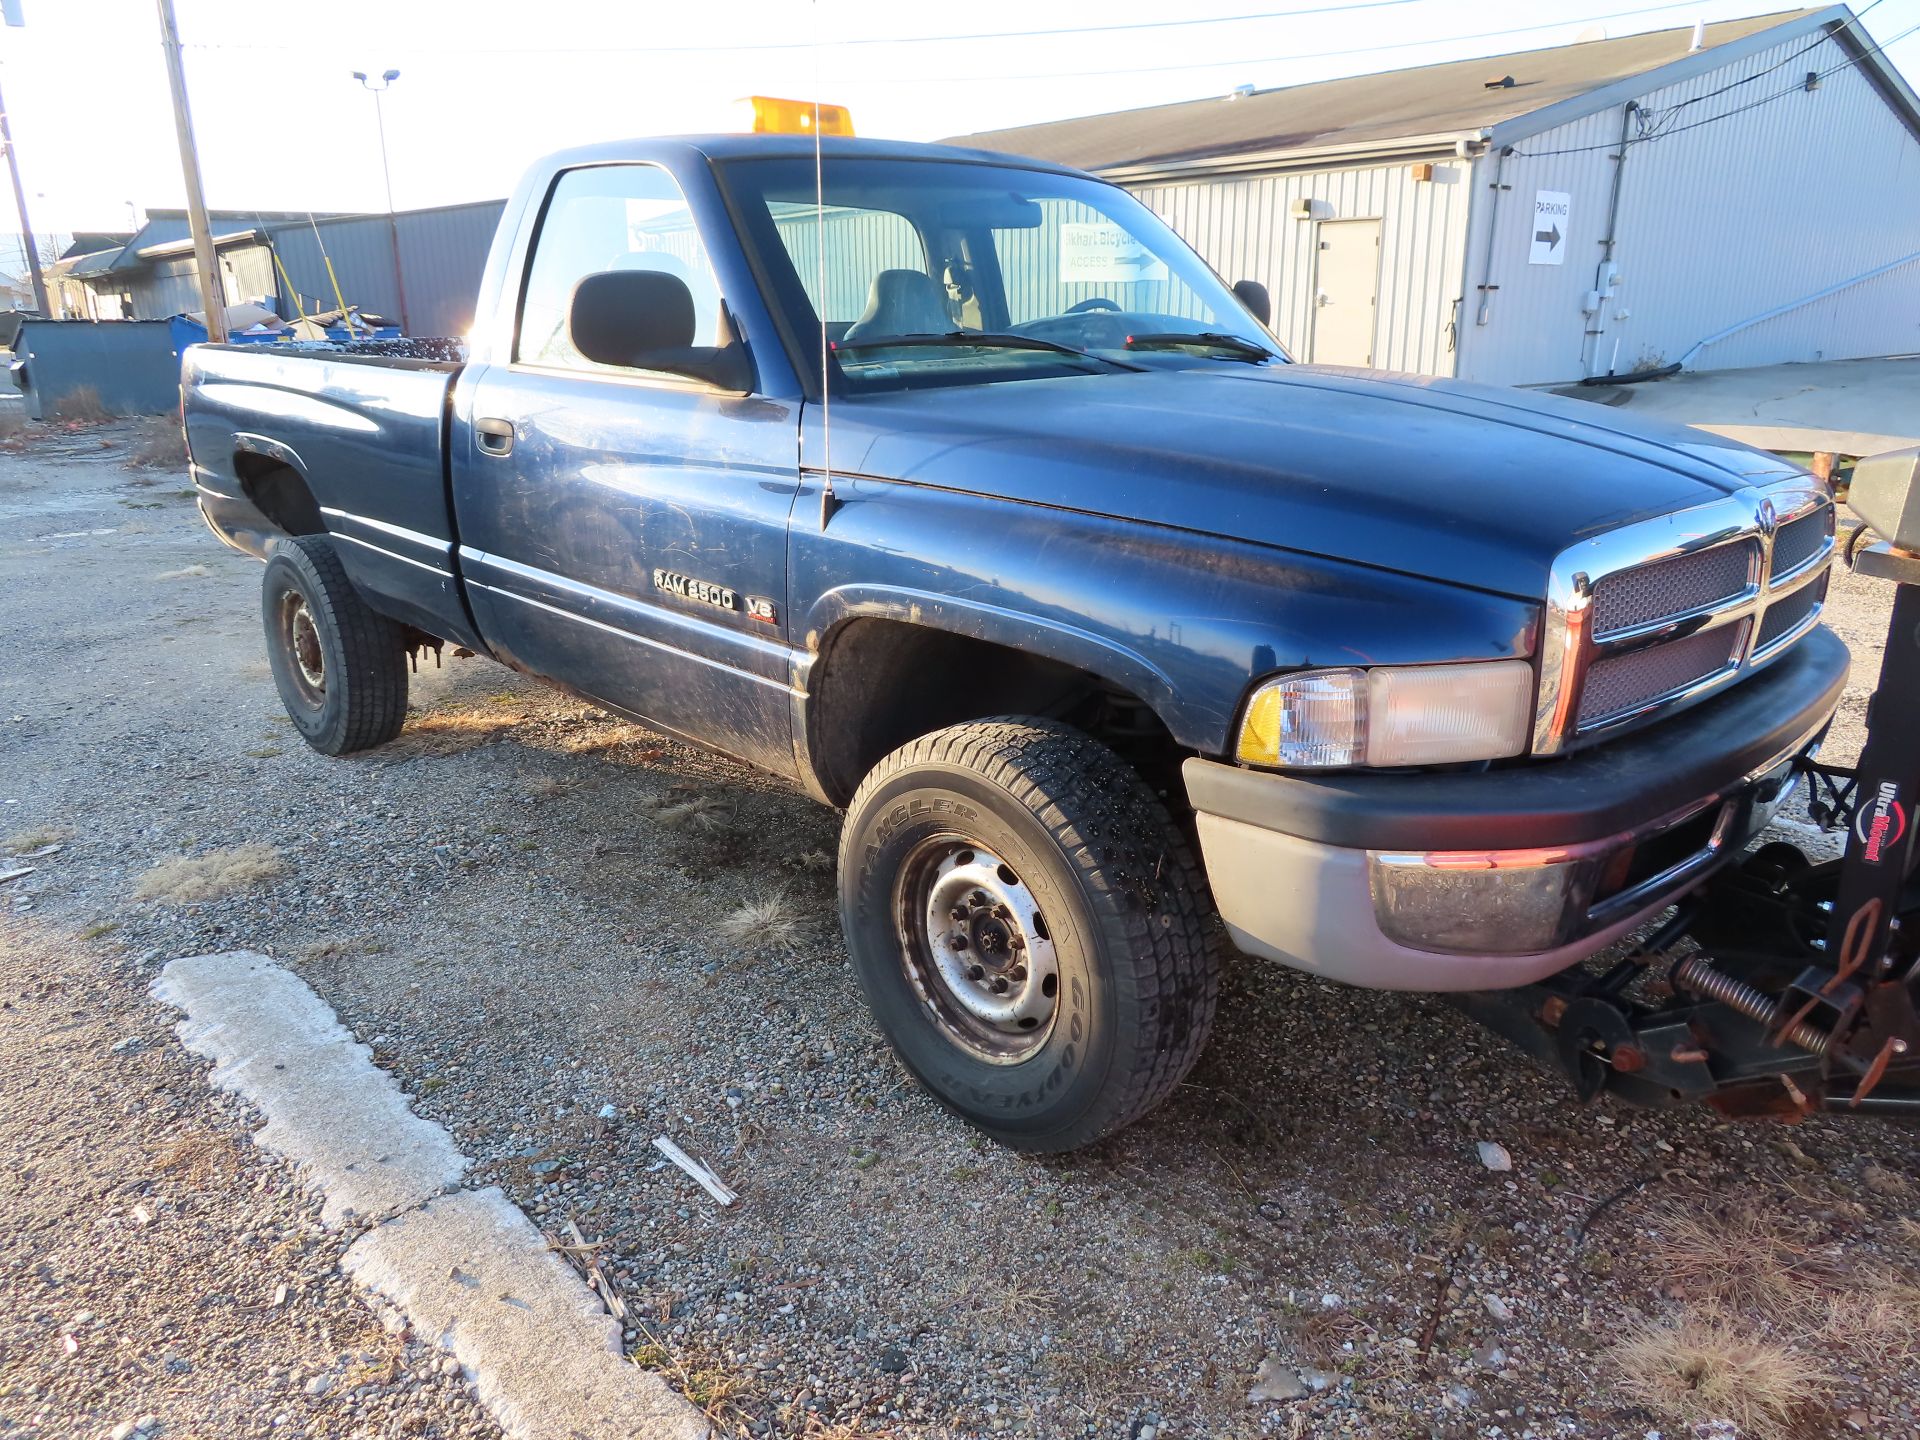 2002 Dodge Ram 2500 plow truck VIN 3B7KF26Z32M309373, 4wd, includes western plow with ultra-mount - Image 9 of 18